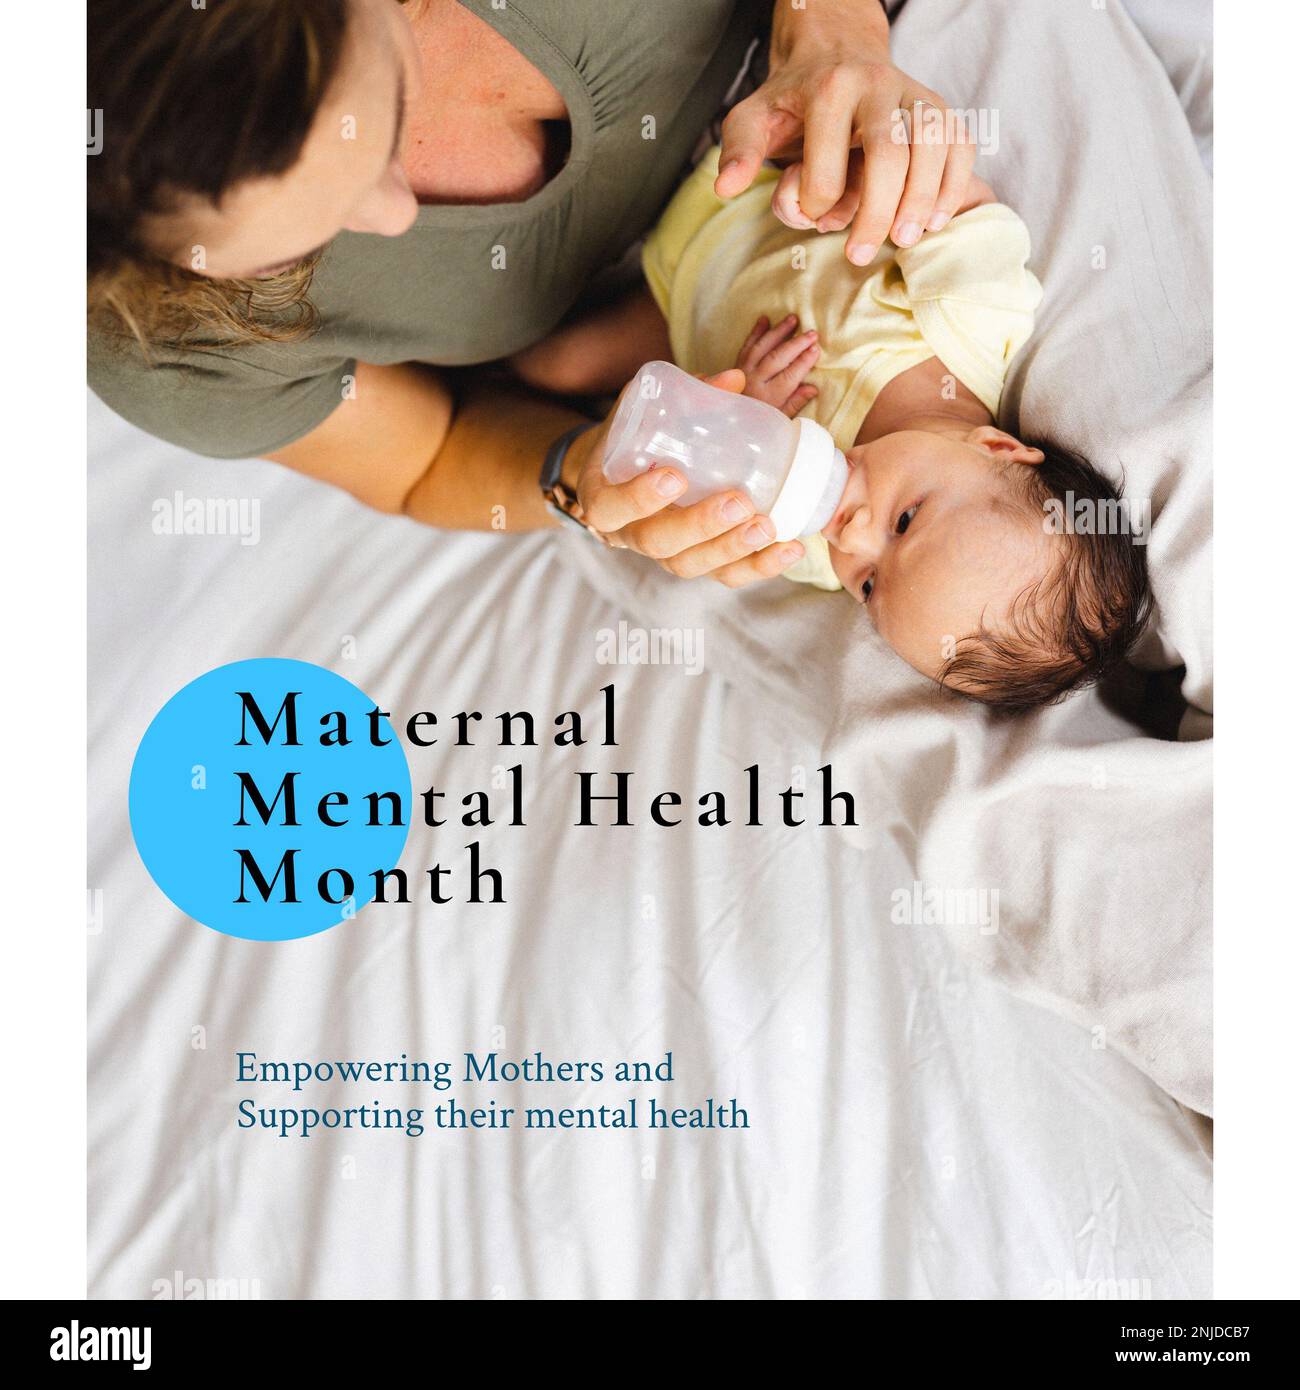 Composition of maternal mental health month text over caucasian mother feeding baby Stock Photo